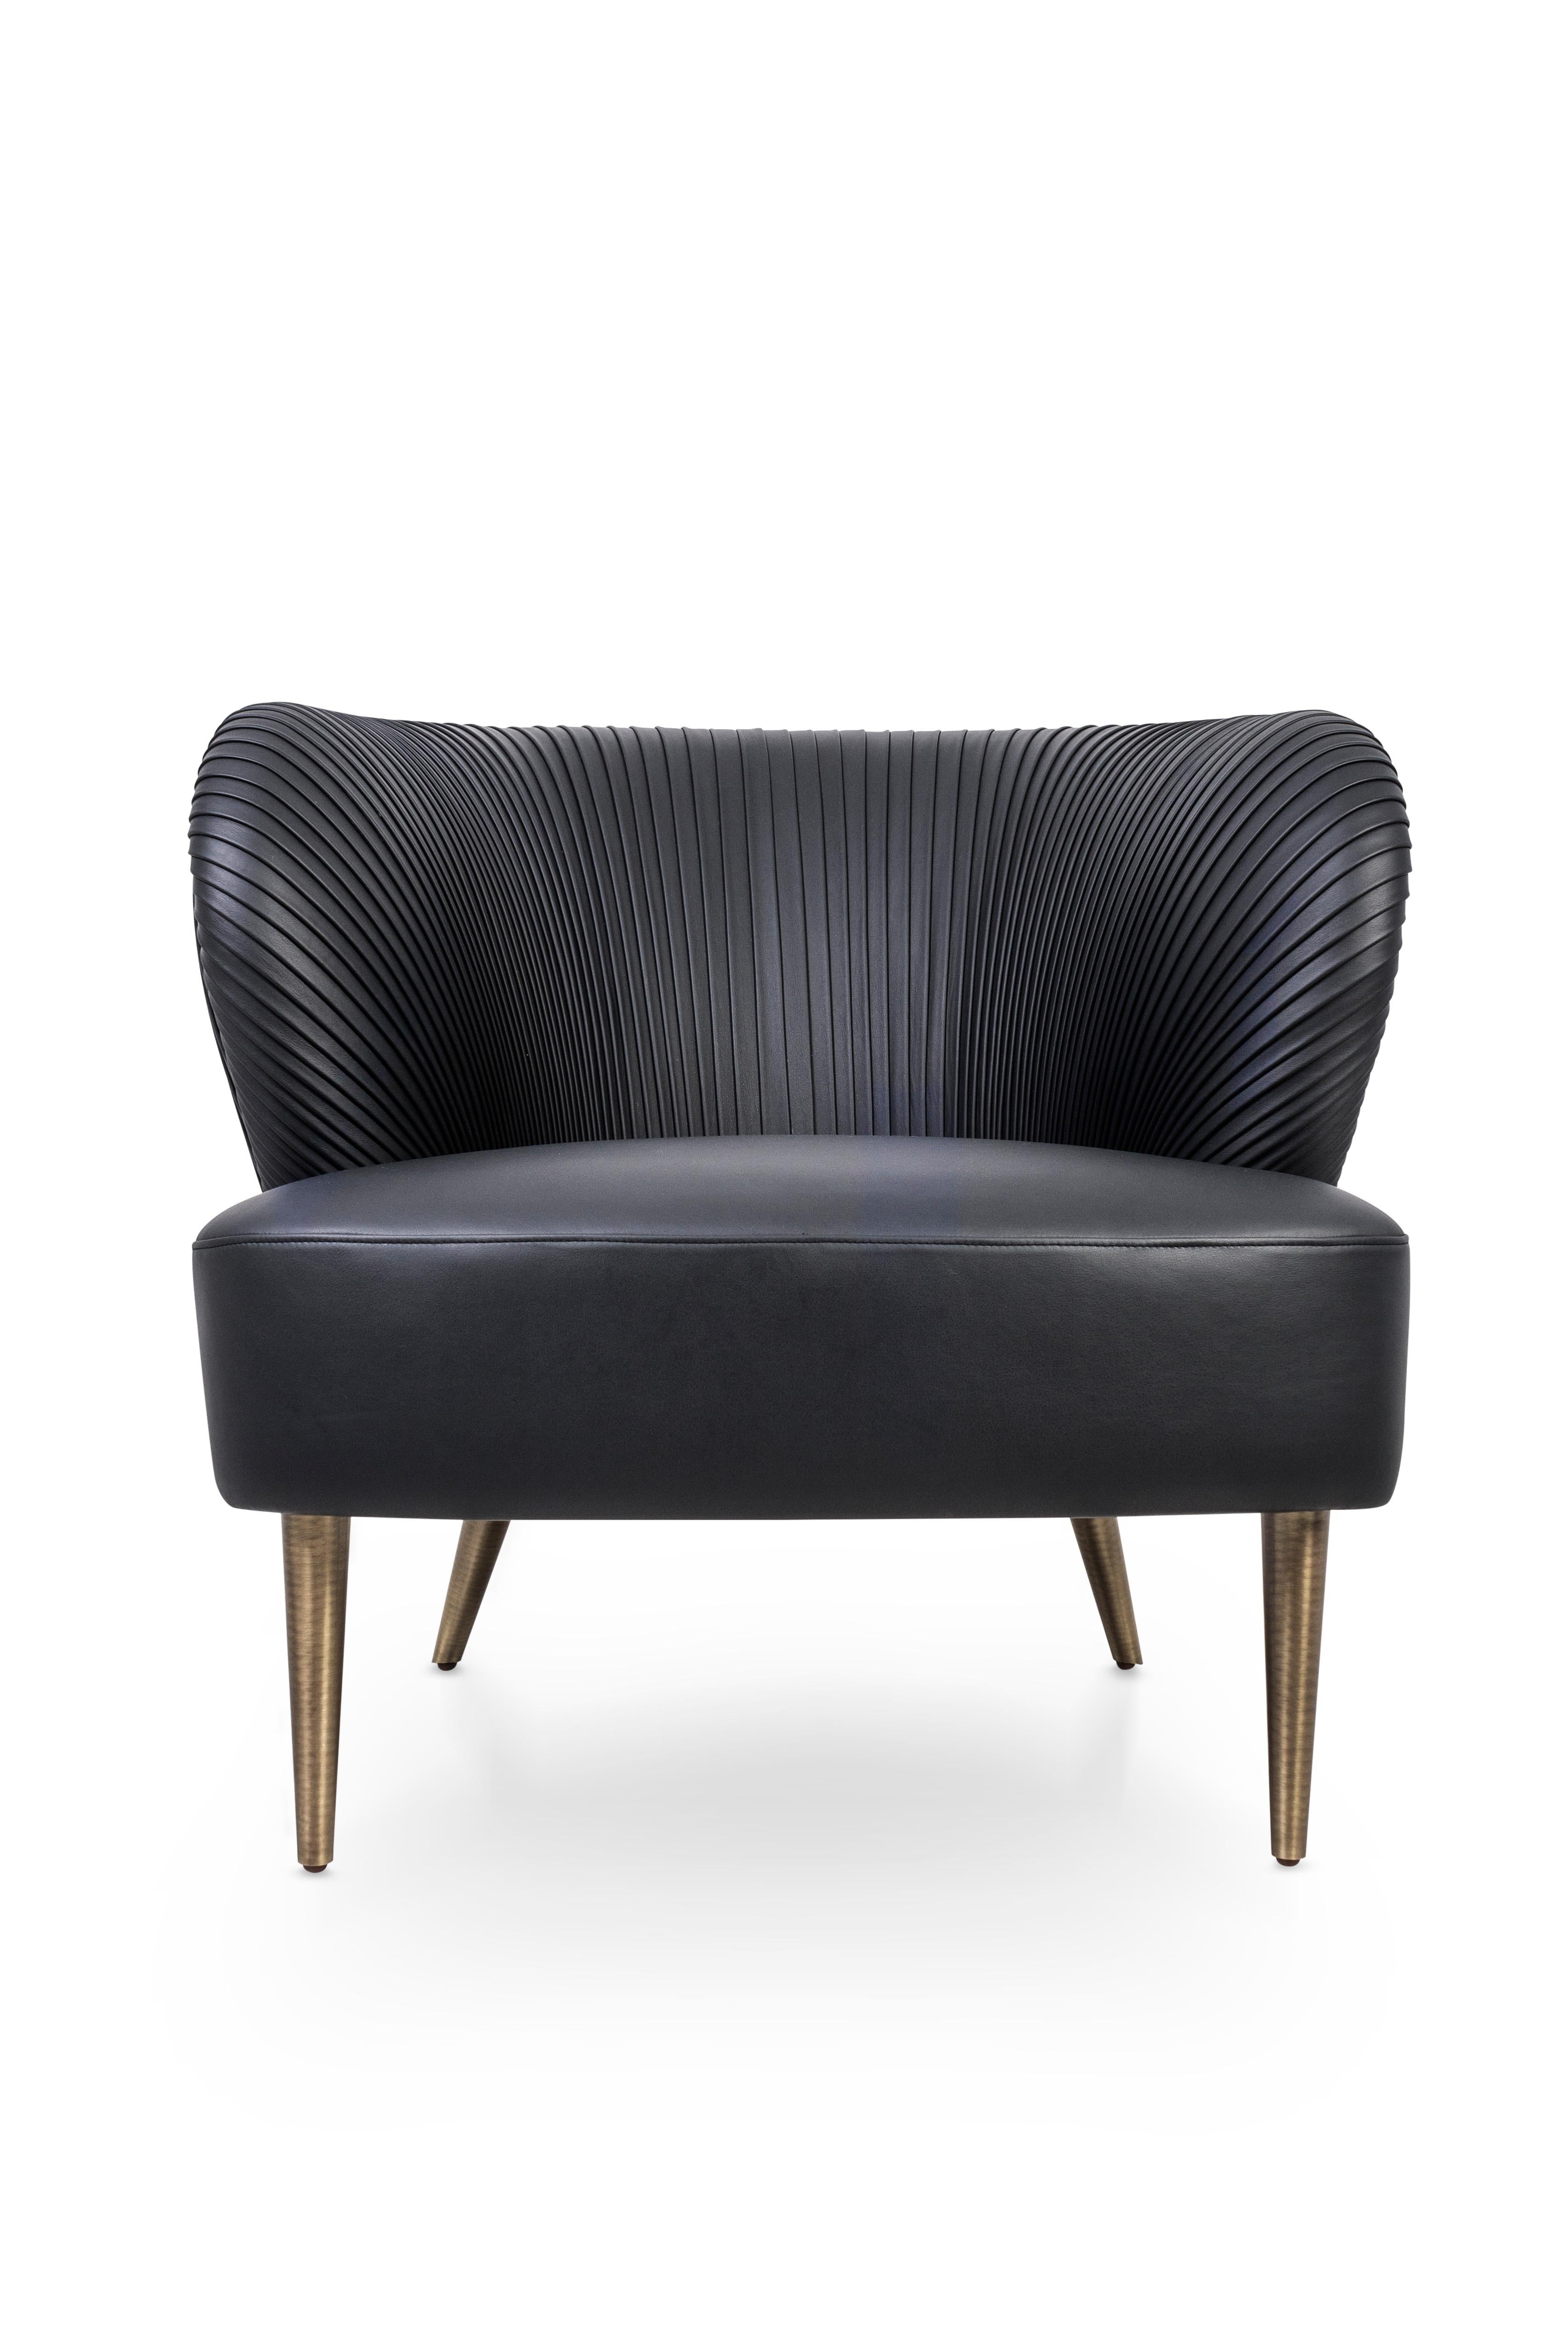 Inspired by the pleated shawls of Fado singers, Alfama is a stunning piece designed for ultimate comfort and elegance. Upholstered in leather and with oxidized brushed brass feet, this armchair is a true reflection of the Paulo Antunes brand's